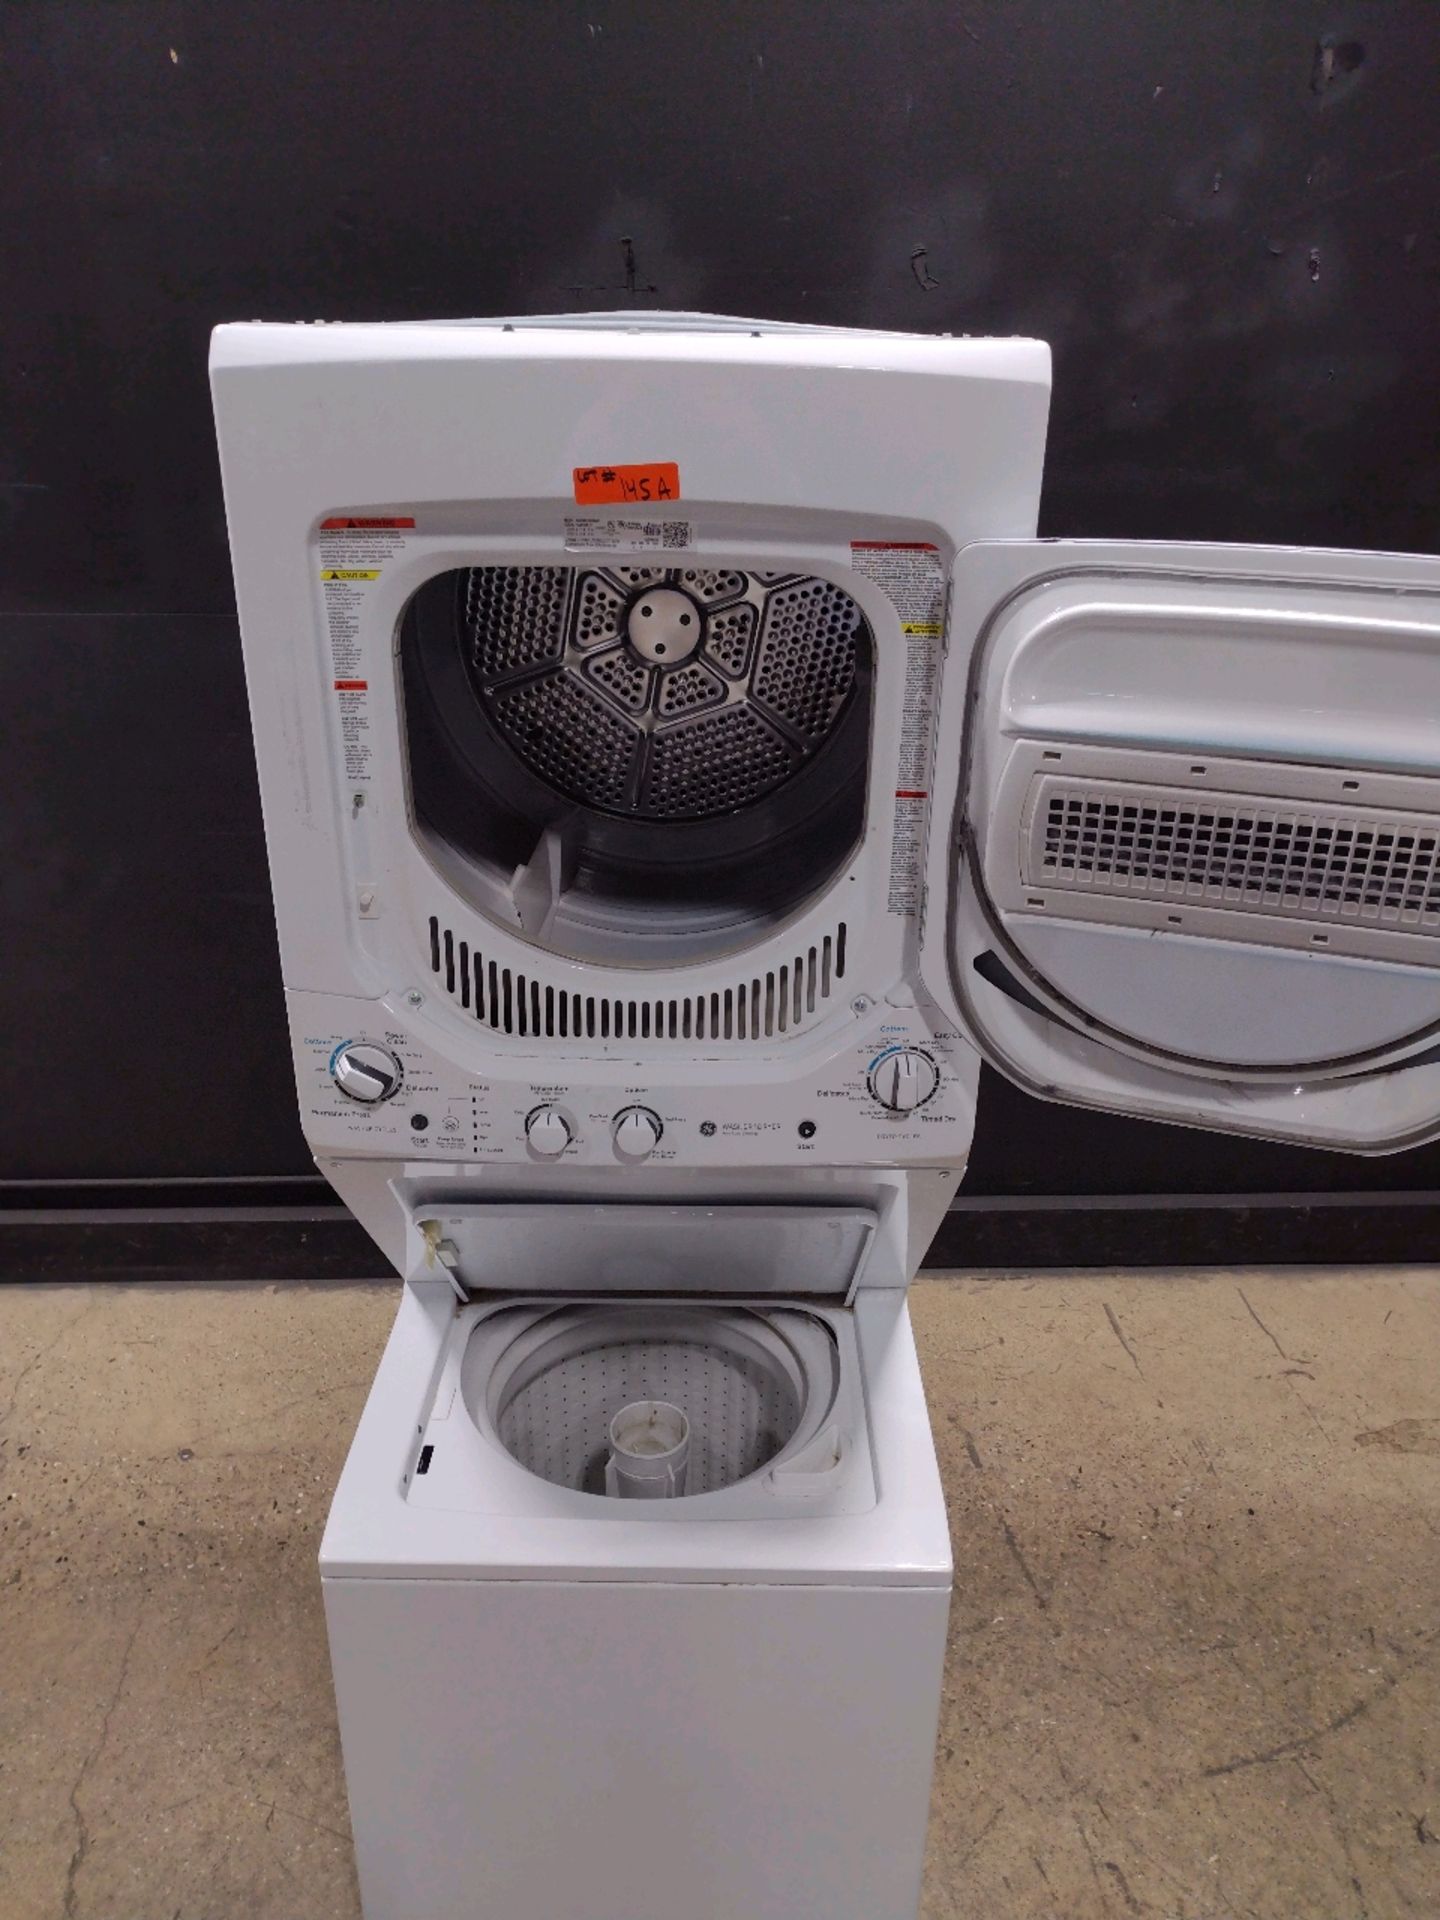 GE GUD24ESSJ0WW WASHER & DRYER (LOCATED AT 3325 MOUNT PROSPECT ROAD, FRANKLIN PARK, IL, 60131) - Image 3 of 3